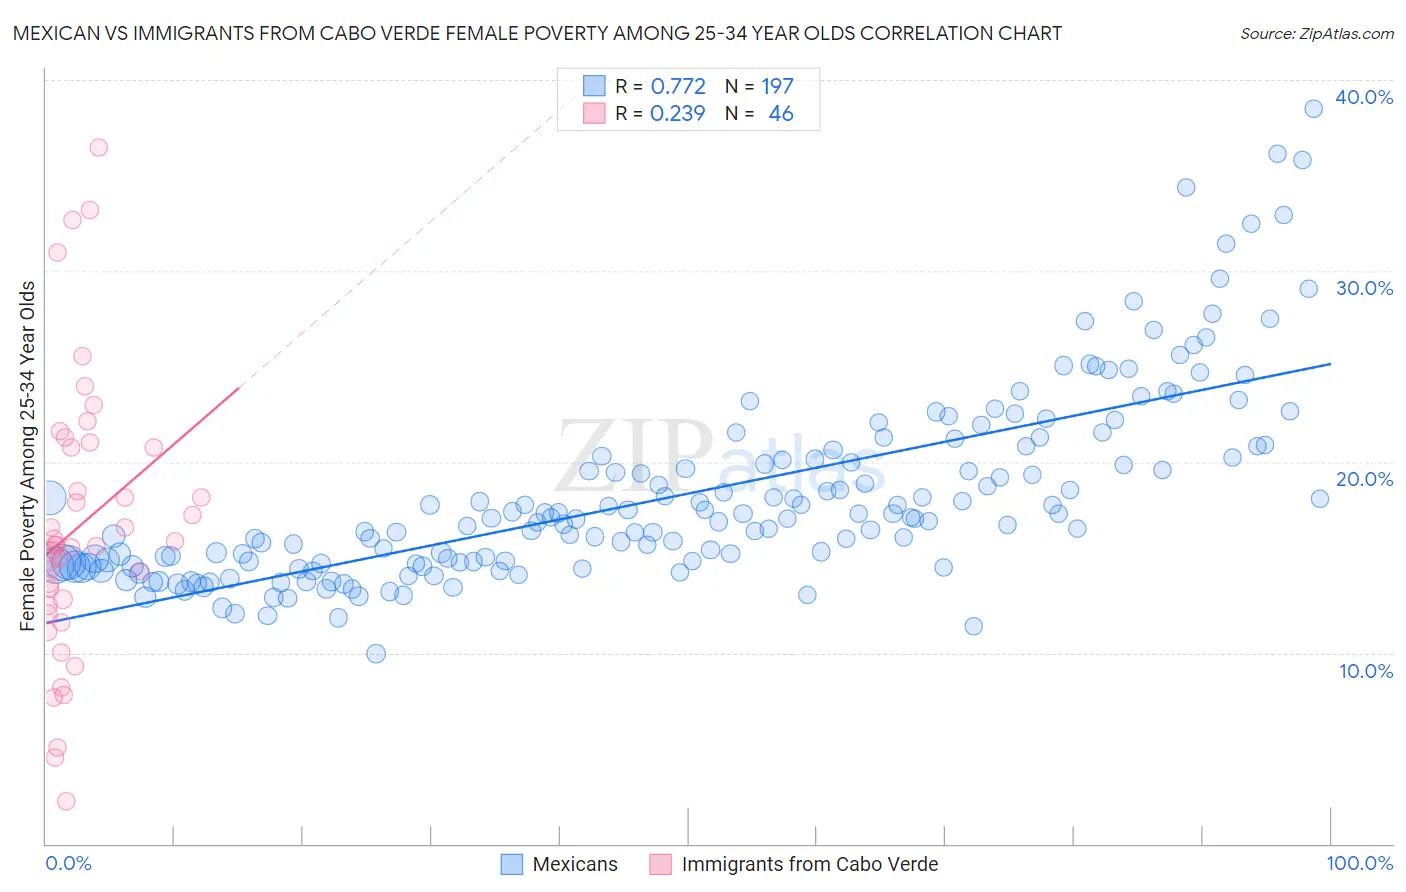 Mexican vs Immigrants from Cabo Verde Female Poverty Among 25-34 Year Olds